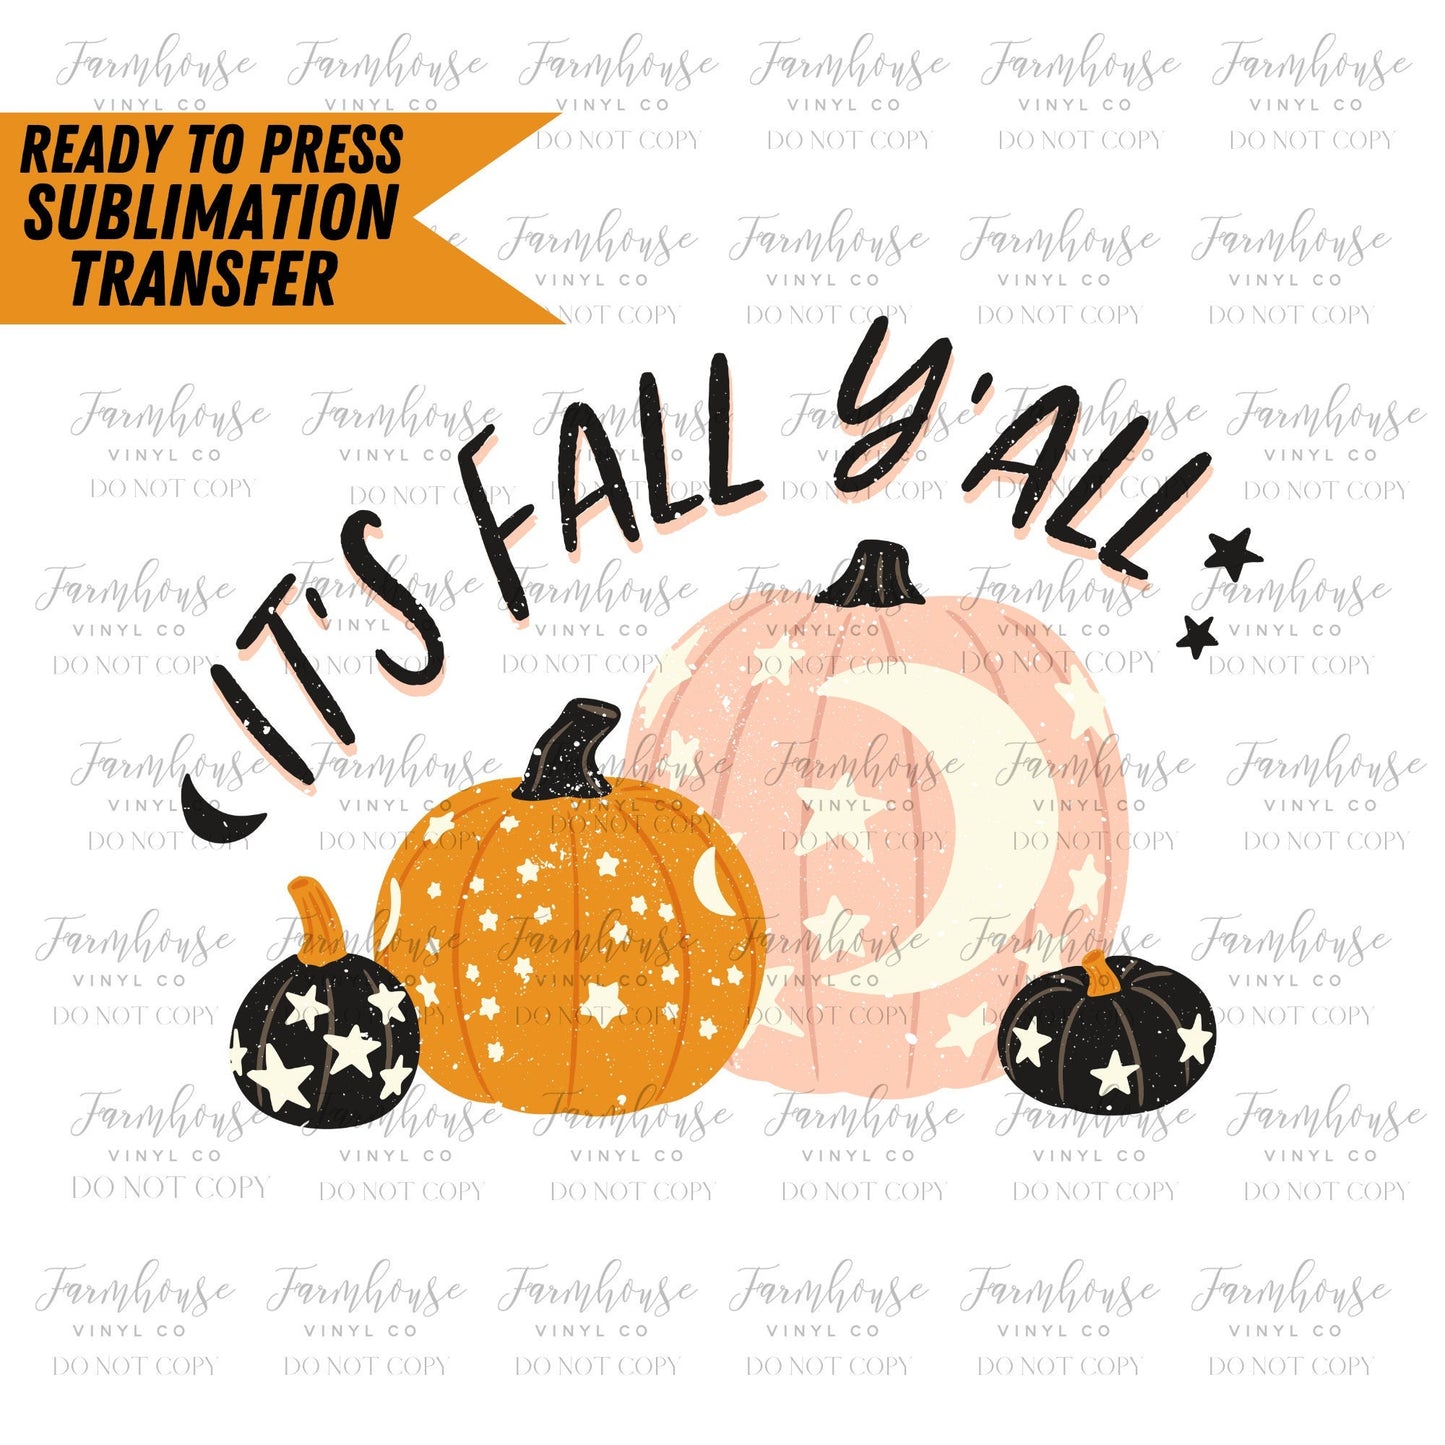 It's Fall Y'all Pumpkins, Ready to Press Sublimation Transfers, Sublimation design, Trick or Treat, Halloween Retro Design, Fall Lover